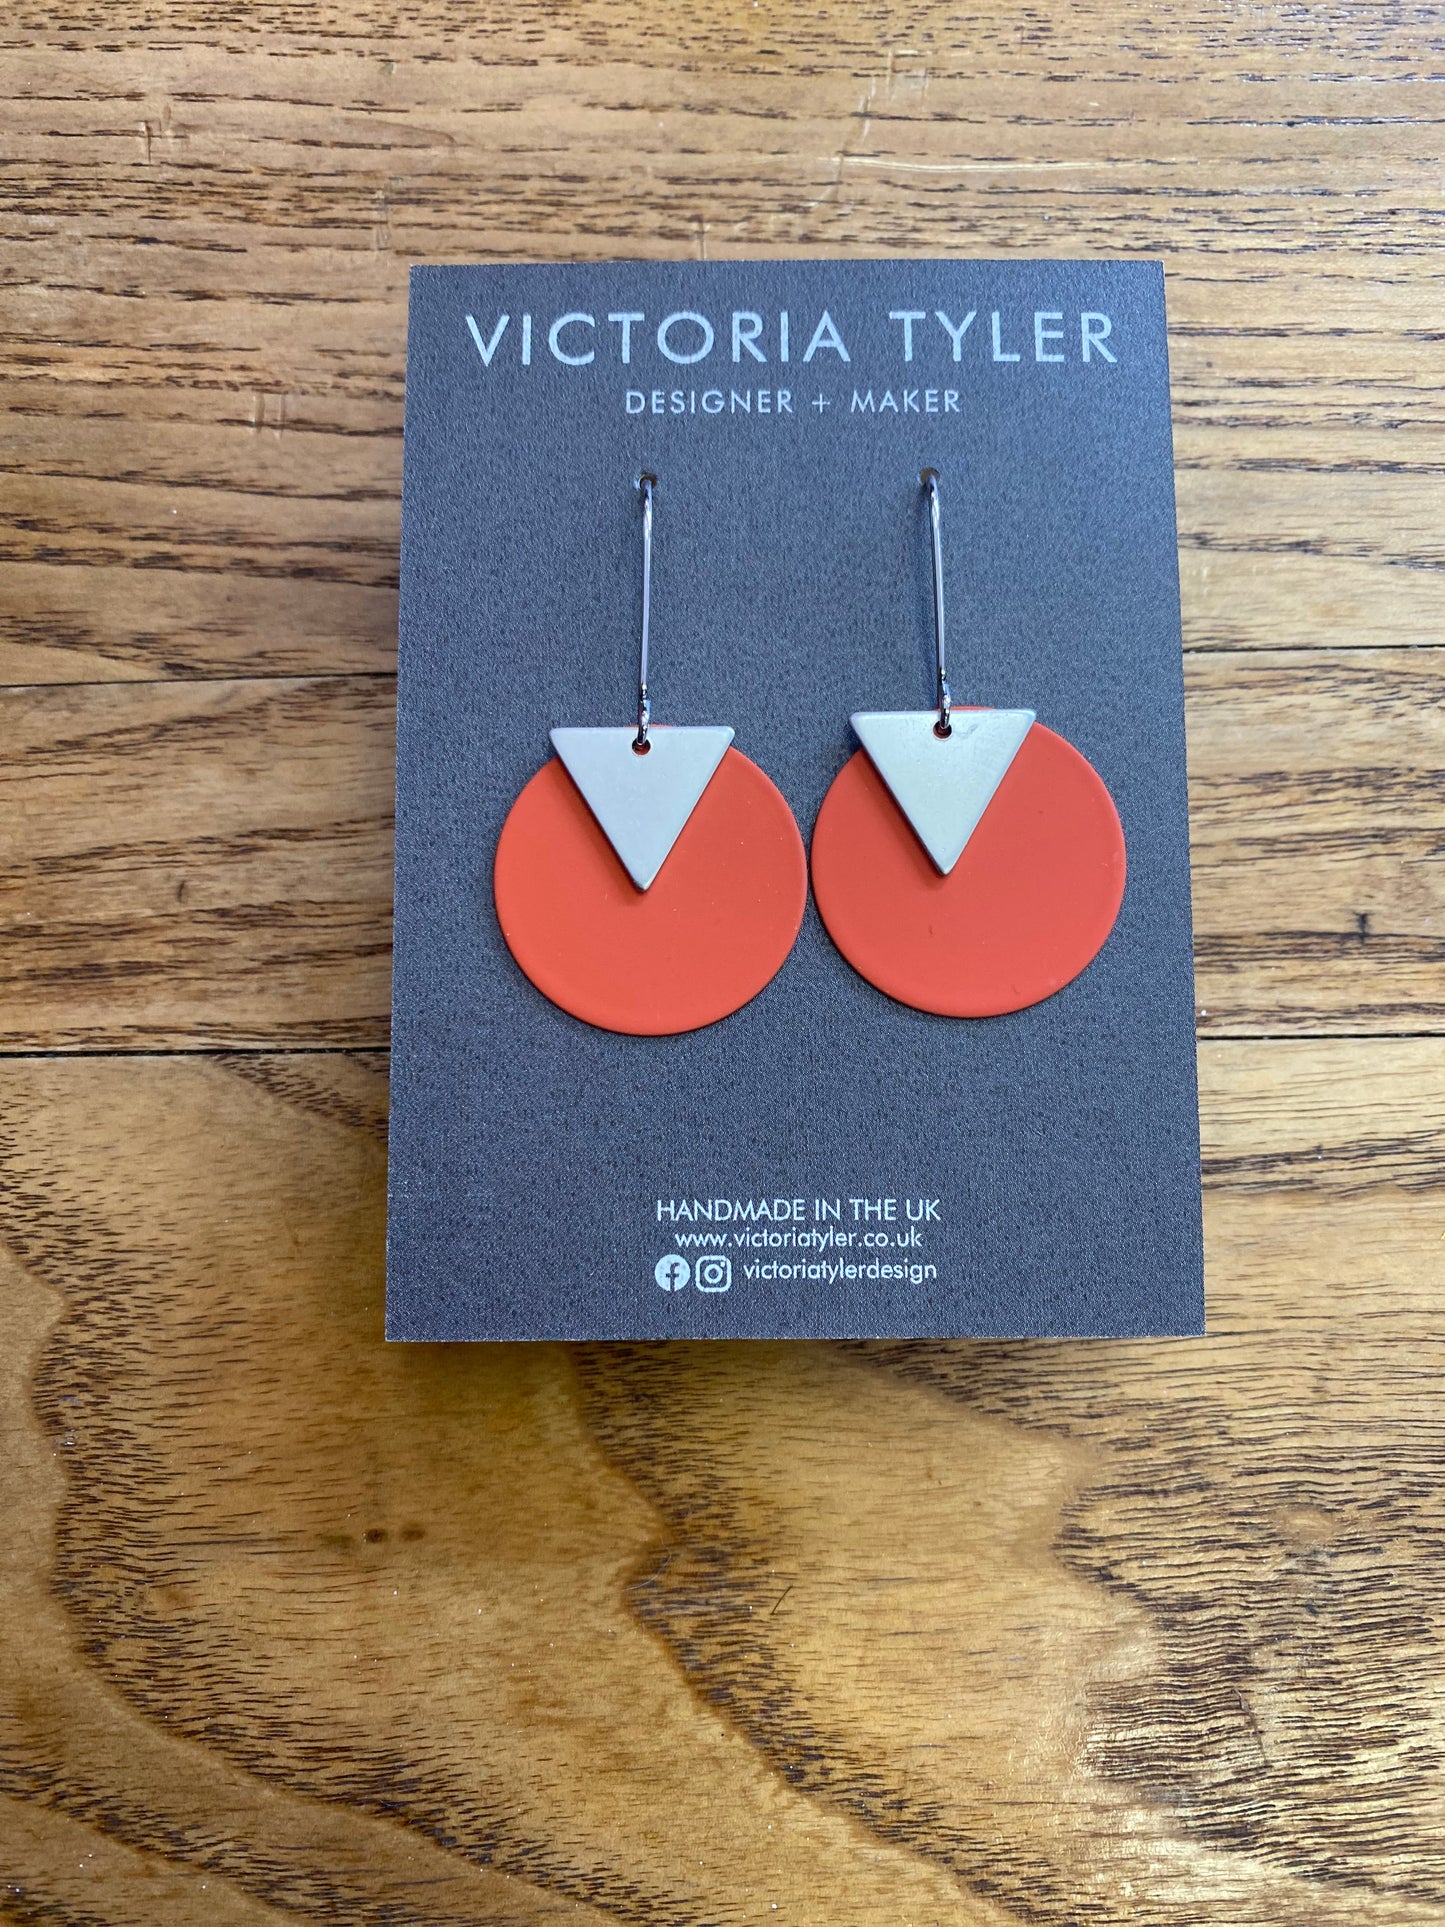 Coral coloured Circle Dangly Earrings with Silver Plate Triangles - 'Kiki'. On a black backing card which says 'Victoria Tyler, Designer + Maker